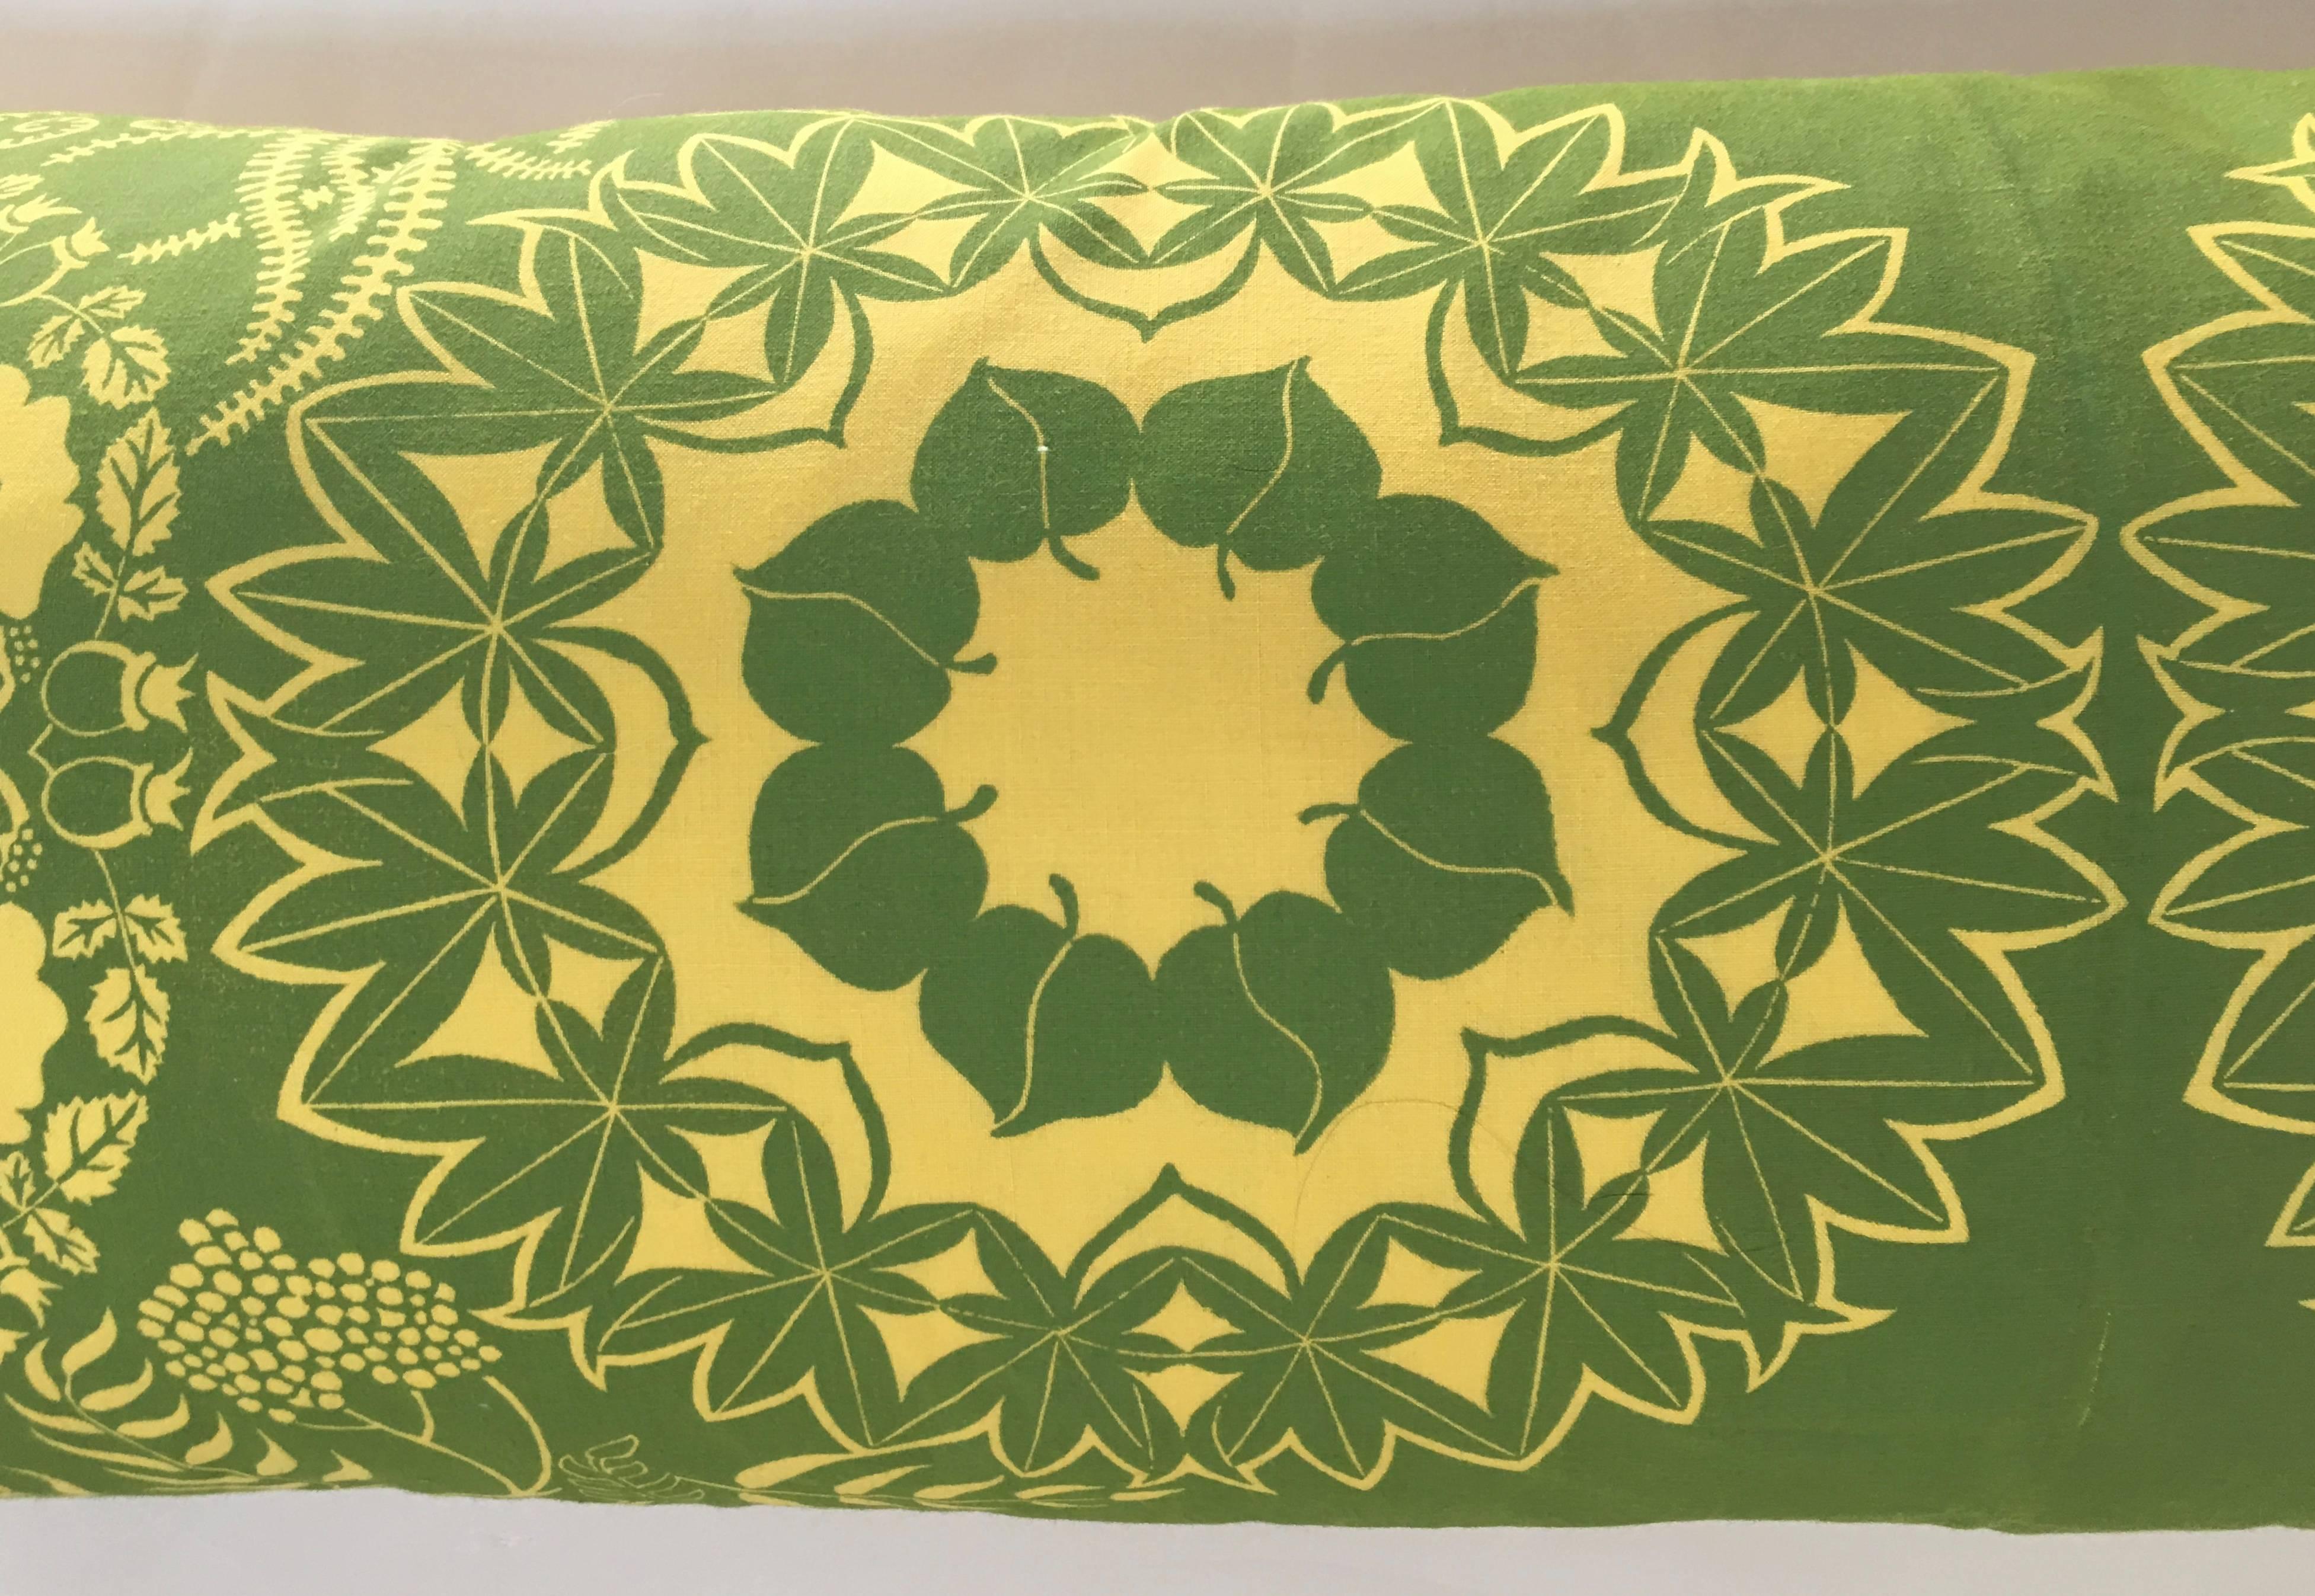 An original hand block printed Folly Cove Designers fabric yellow and green long rectangular lumbar pillow in the 'Summer Wreaths' pattern by Mary Ann Lash, circa 1969, new down filling and yellow cotton linen backing. This is a rare pattern and